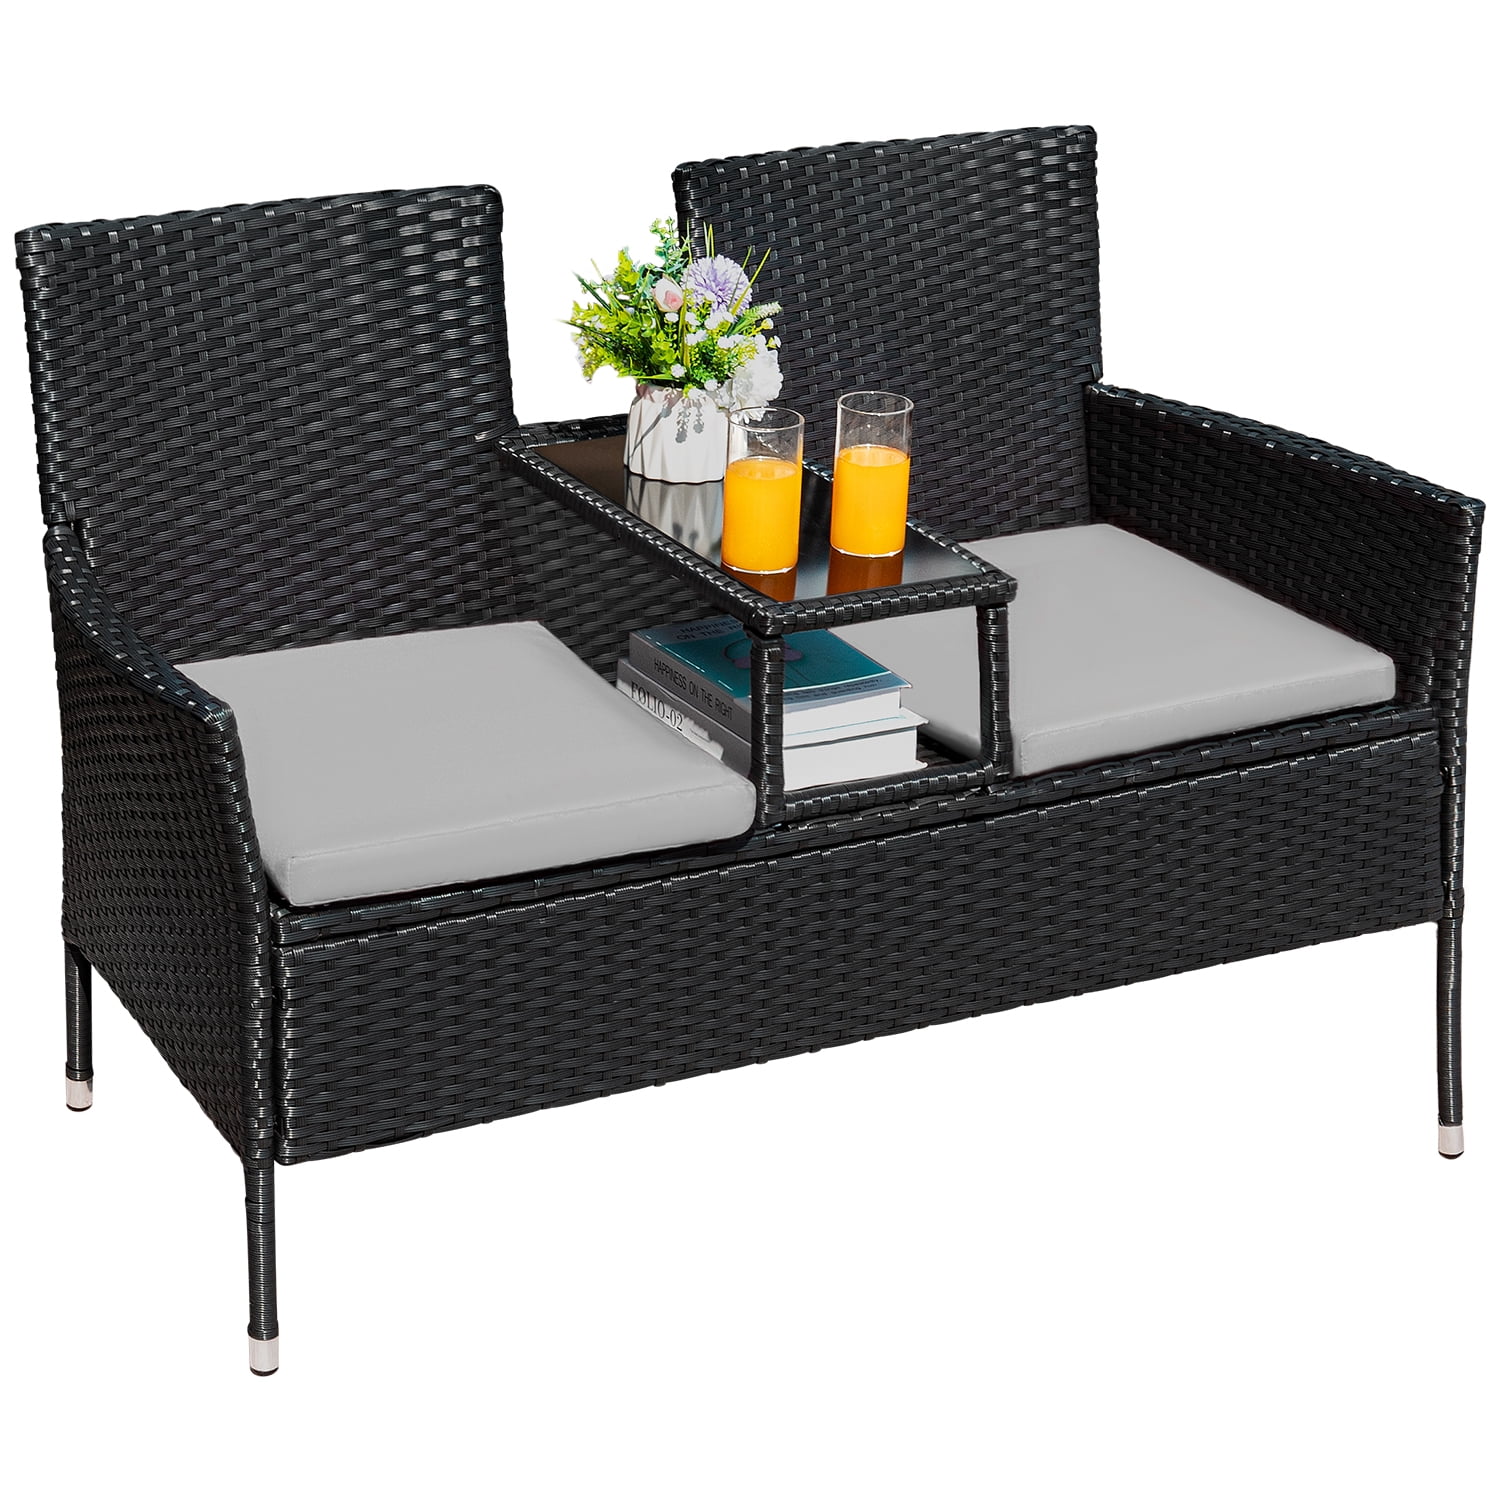 Devoko Outdoor Patio Loveseat Modern Rattan Patio Conversation Furniture Set with Cushions & Built-in Coffee Table Porch Furniture for Garden Lawn Backyard, Gray